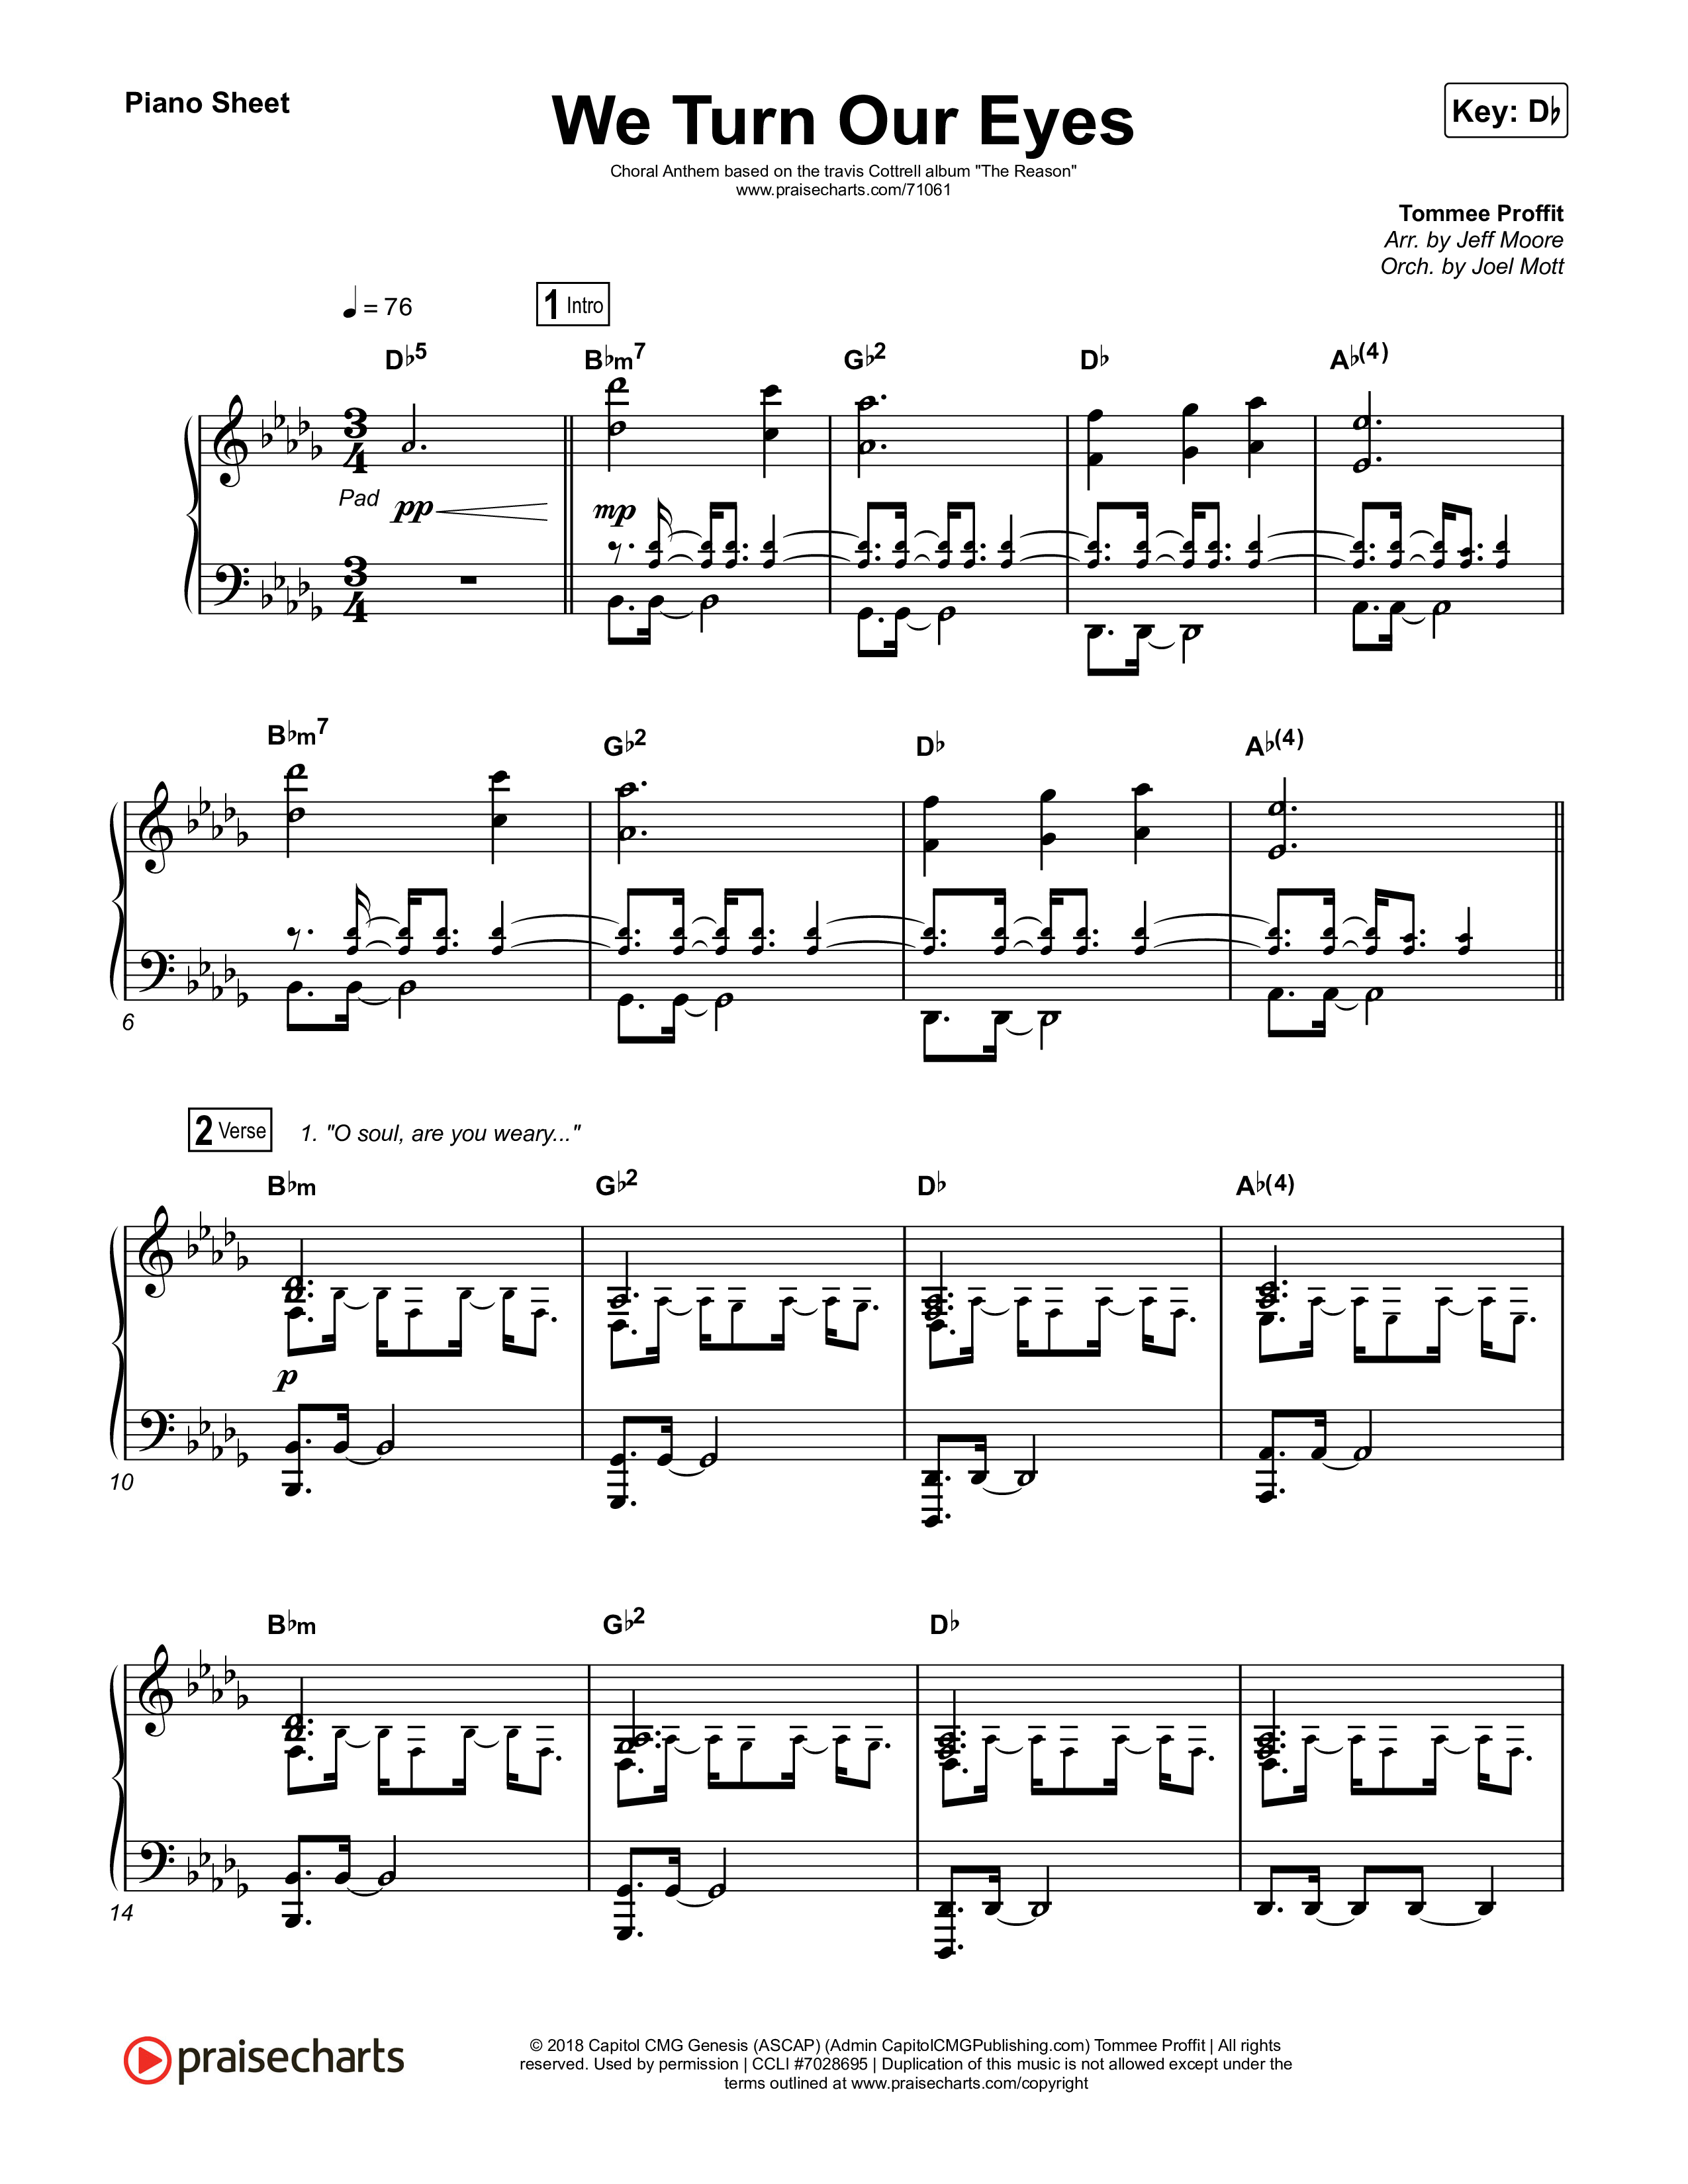 We Turn Our Eyes Piano Sheet (Travis Cottrell)